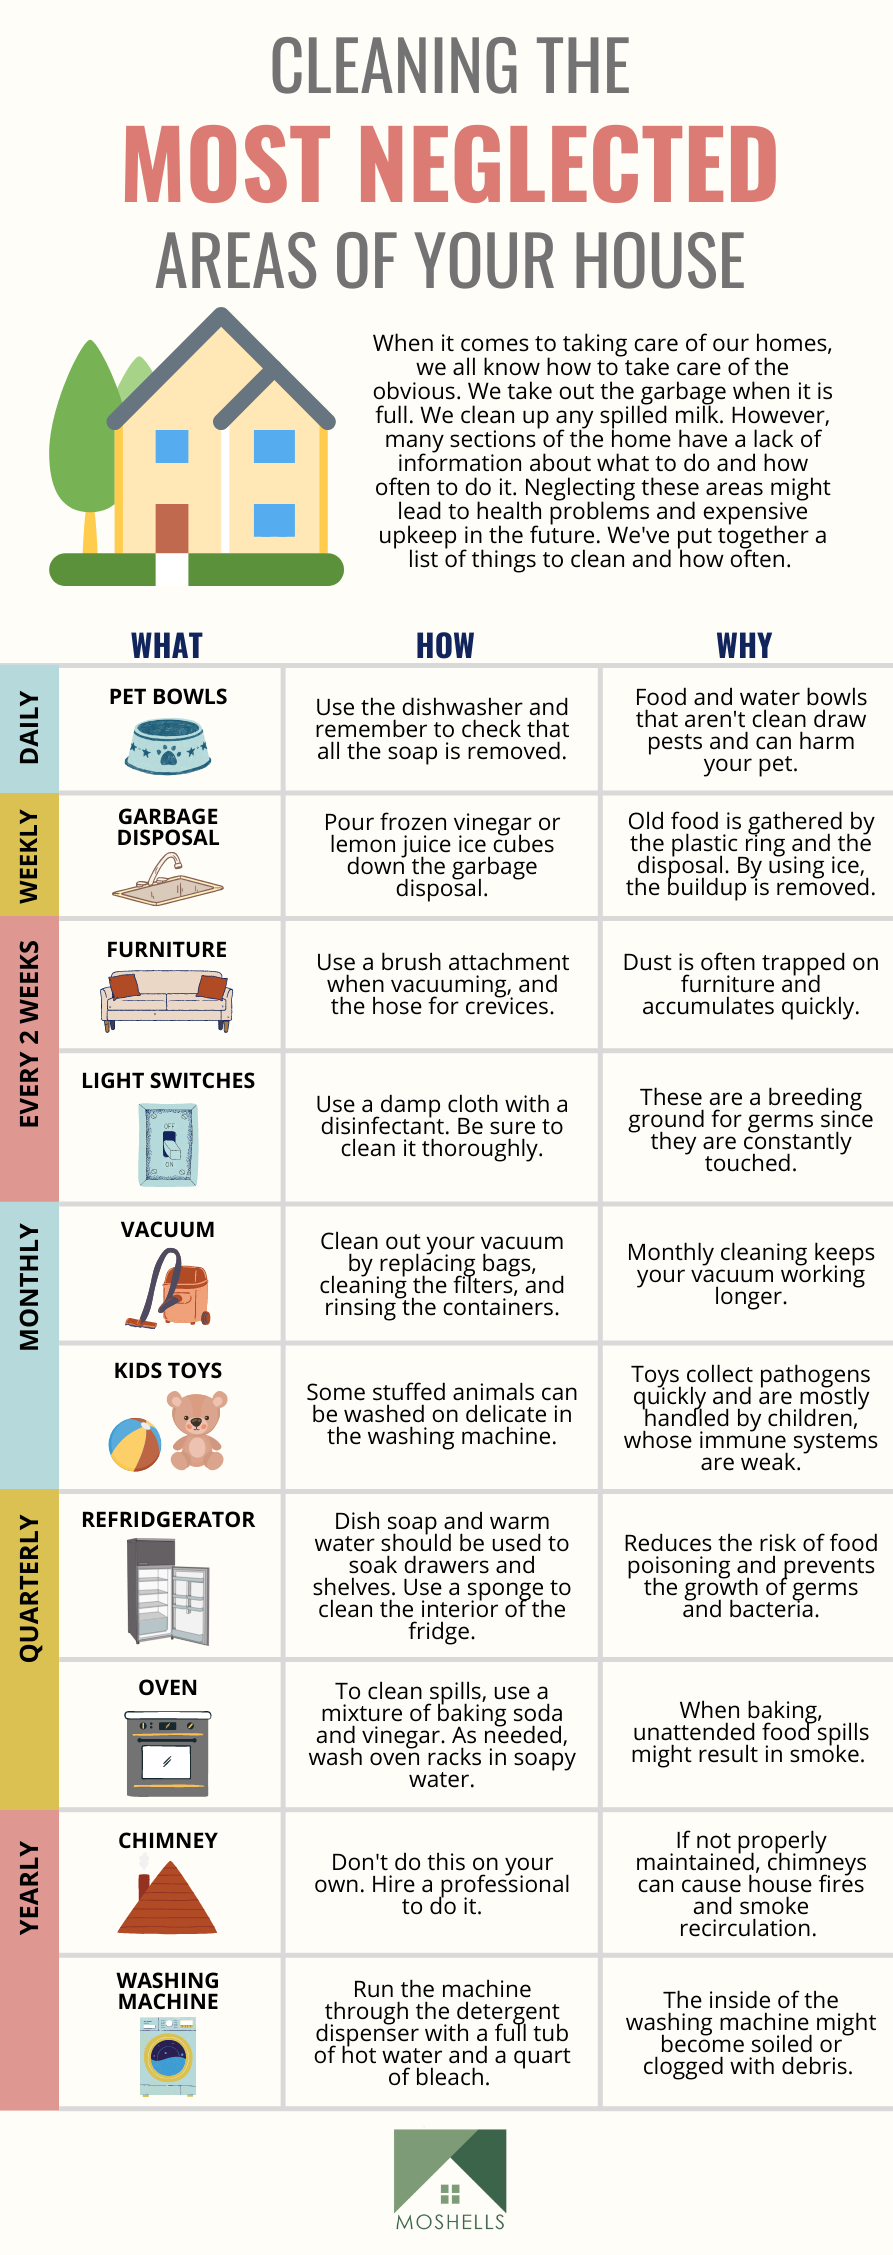 Infographic about when to clean neglected areas of your house